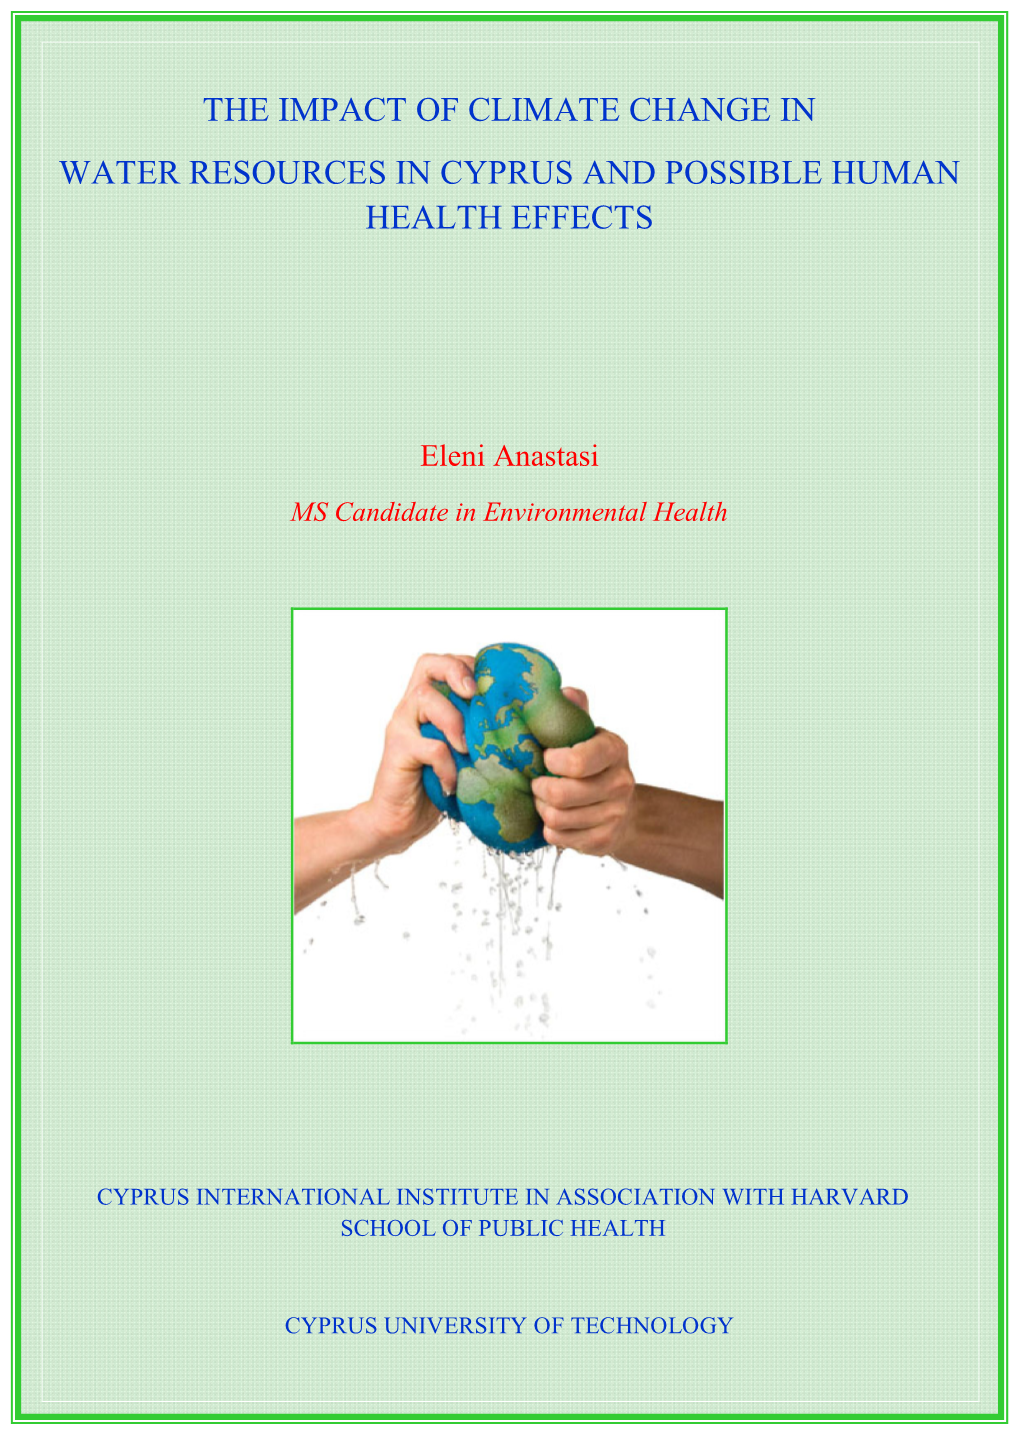 The Impact of Climate Change in Water Resources in Cyprus and Possible Human Health Effects